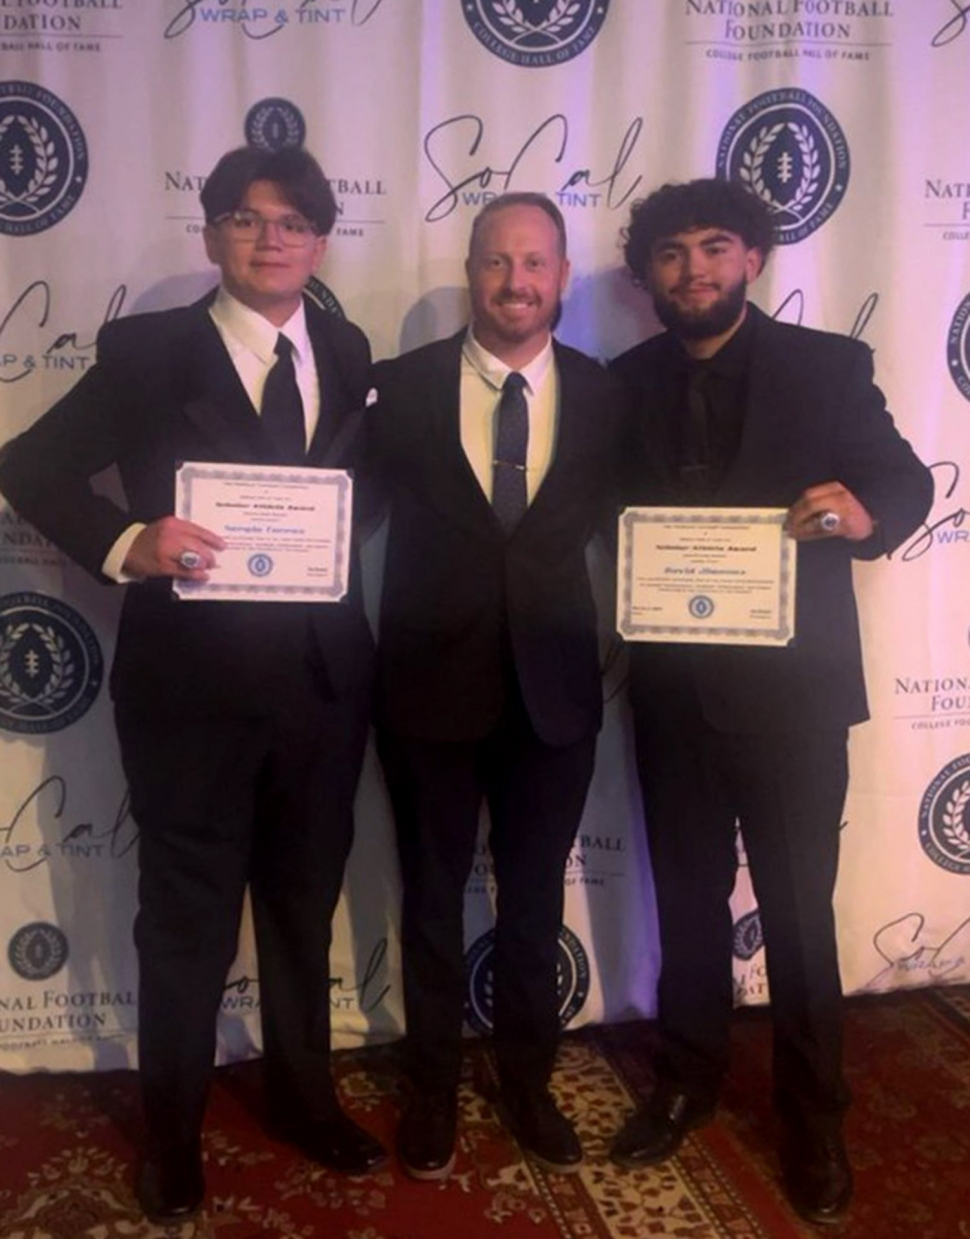 Pictured (l-r) are National Football Foundation Hall of Fame Inductee Sergio Torres, Fillmore High School Head Football Coach Charlie Weis, and National Football Foundation Hall of Fame Inductee David Jimenez. Photo courtesy Fillmore Unified School District Blog.